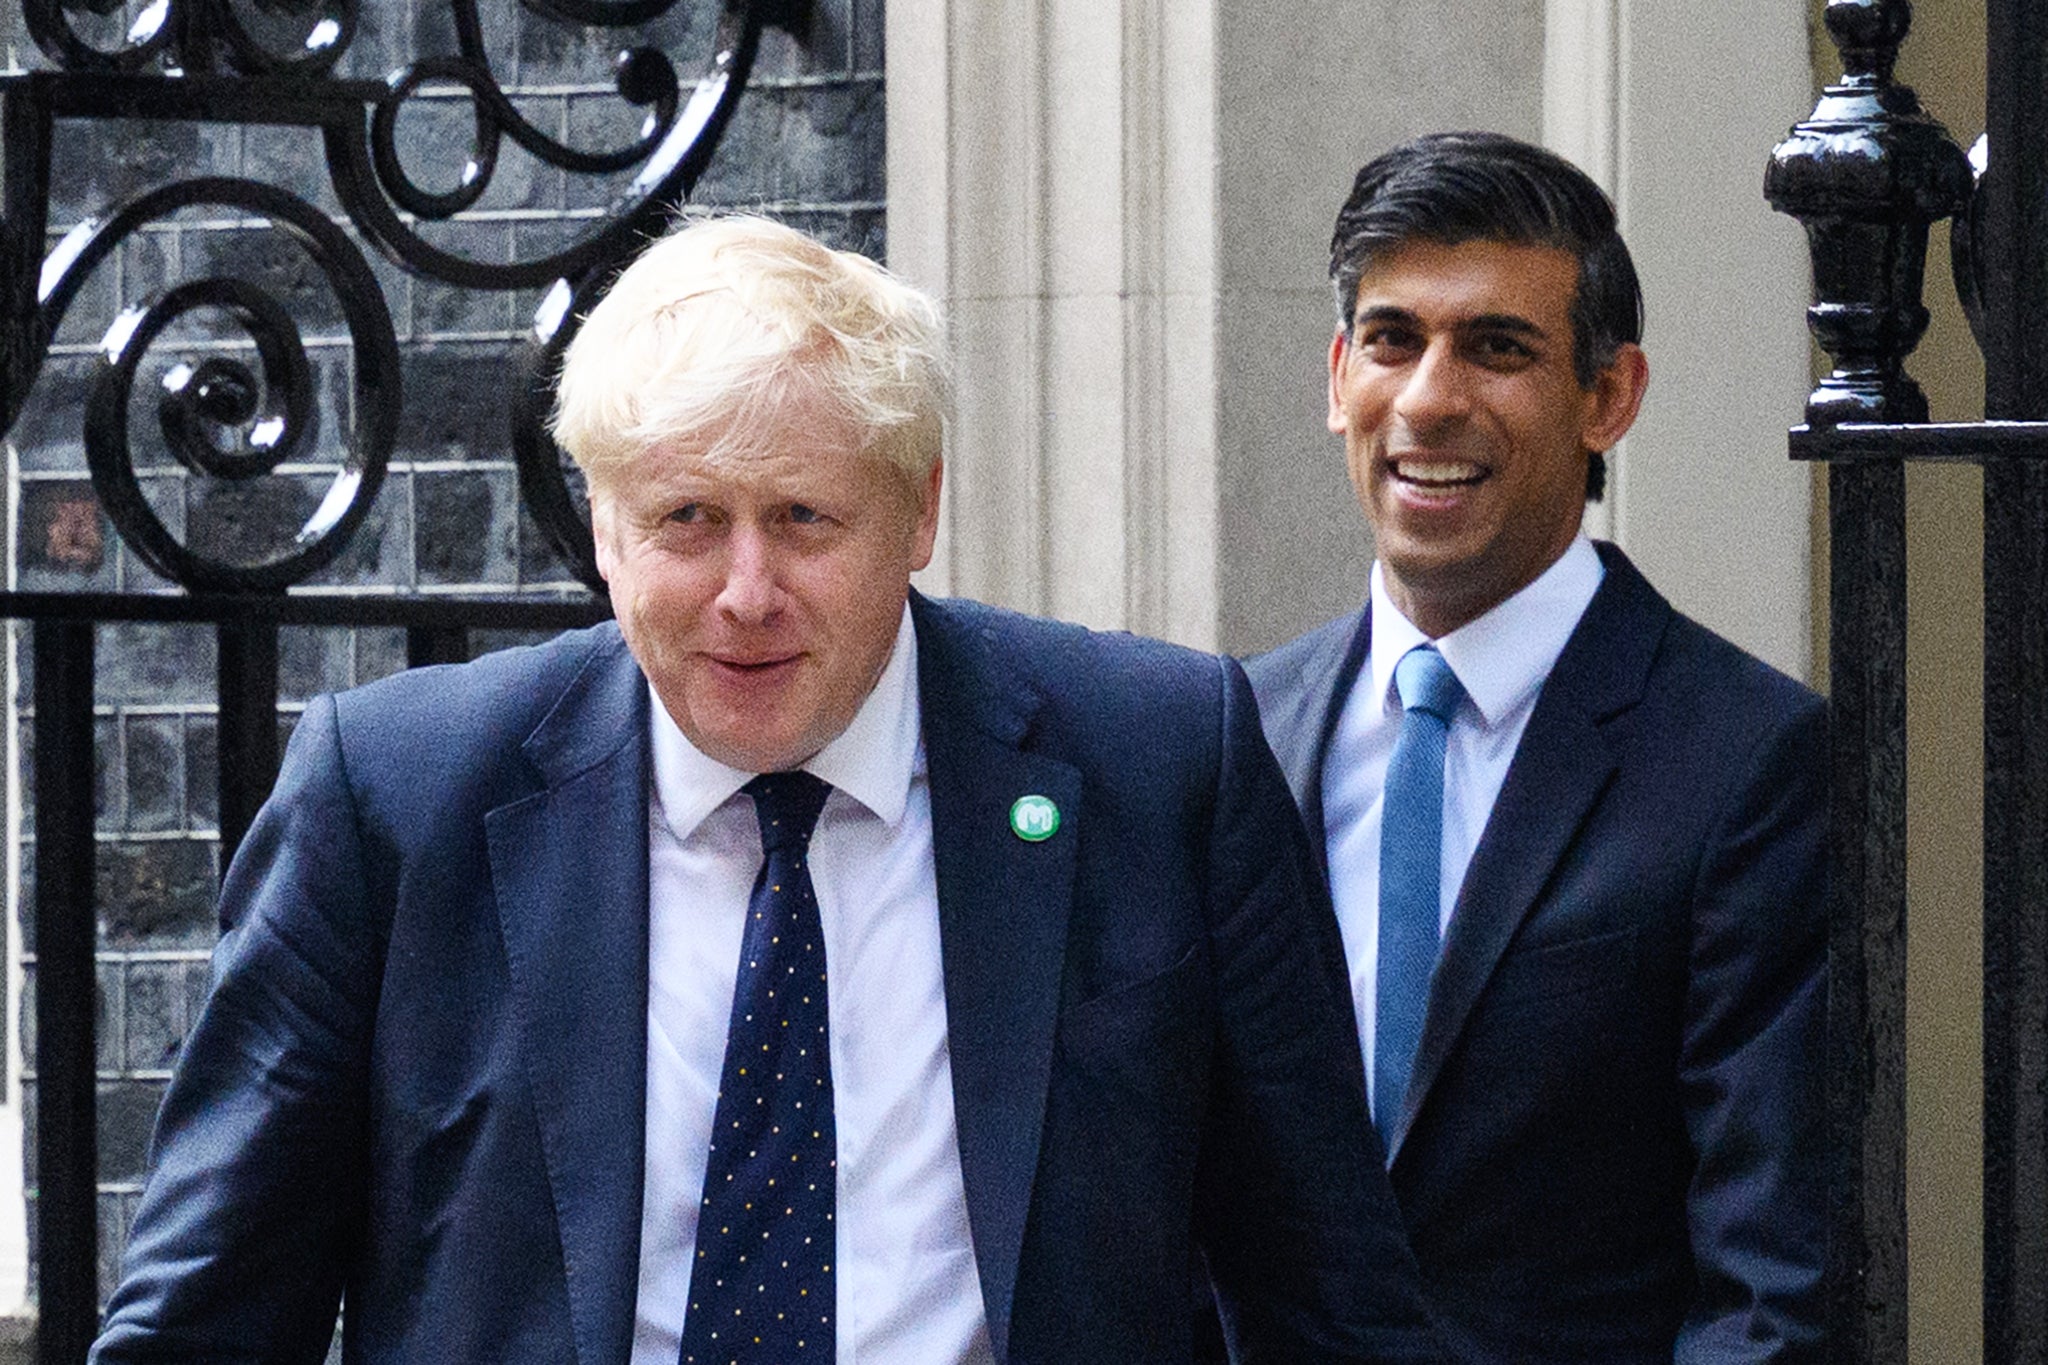 Rishi Sunak (right) also faces questions about his relationship with Boris Johnson and top No 10 officials